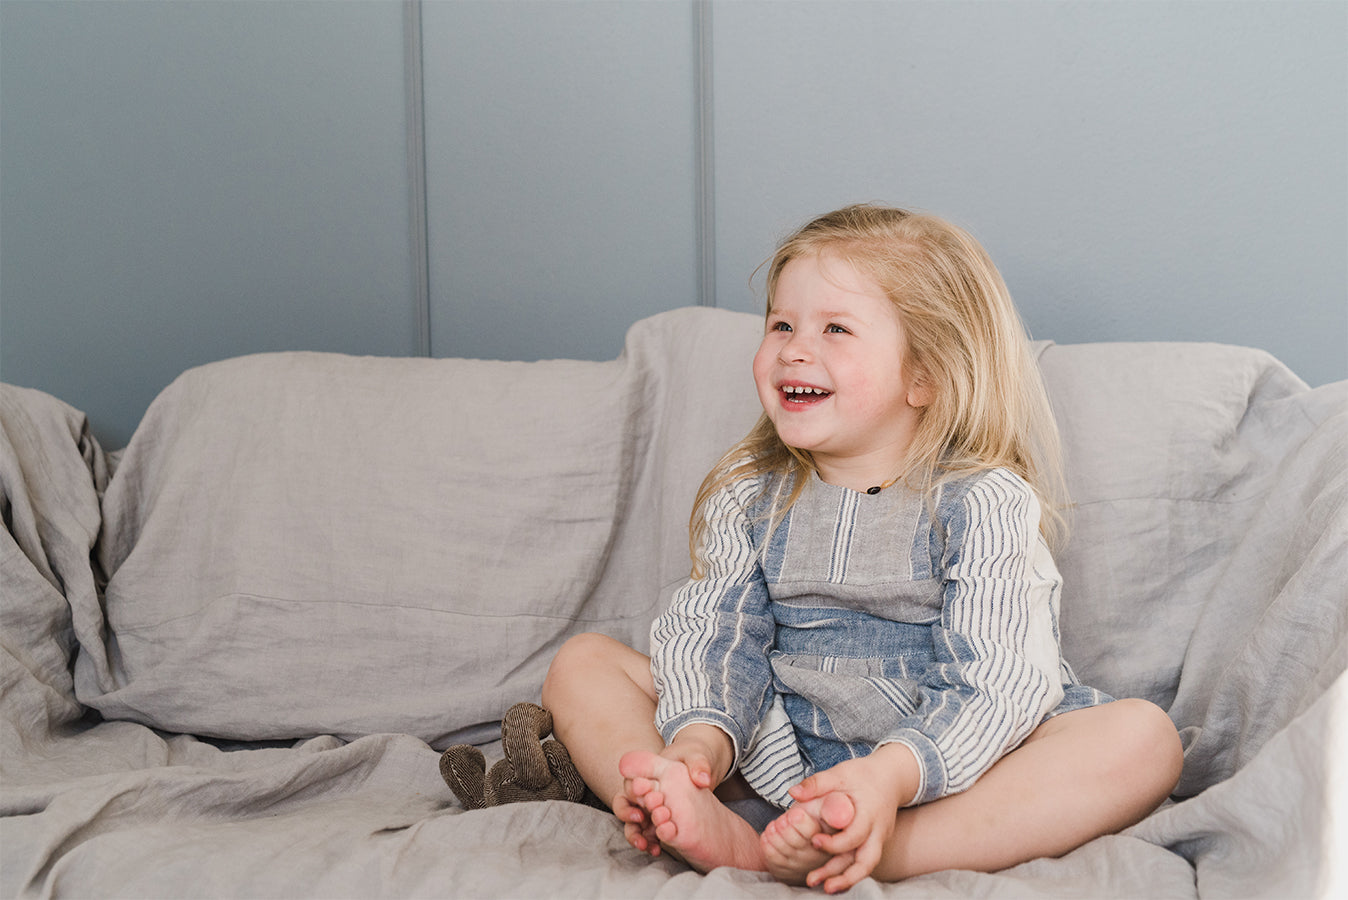 a toddler having fun sitting on a sofa with a linen cover and she is wearing a linen dress in blue stripes